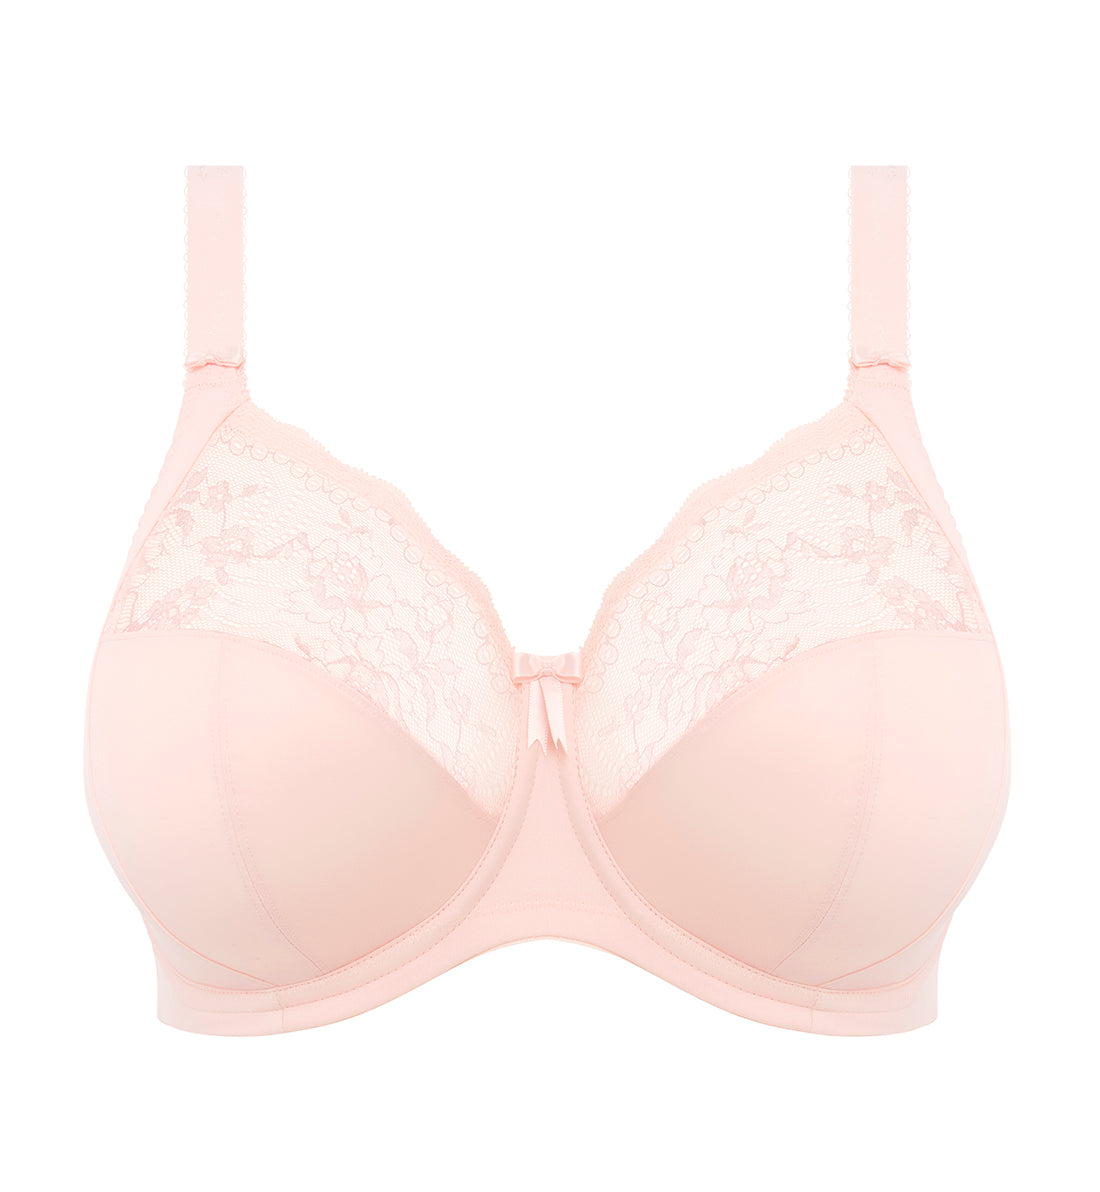 Elomi Morgan Stretch Lace Banded Underwire Bra (4111),32GG,Ballet Pink - Ballet Pink,32GG